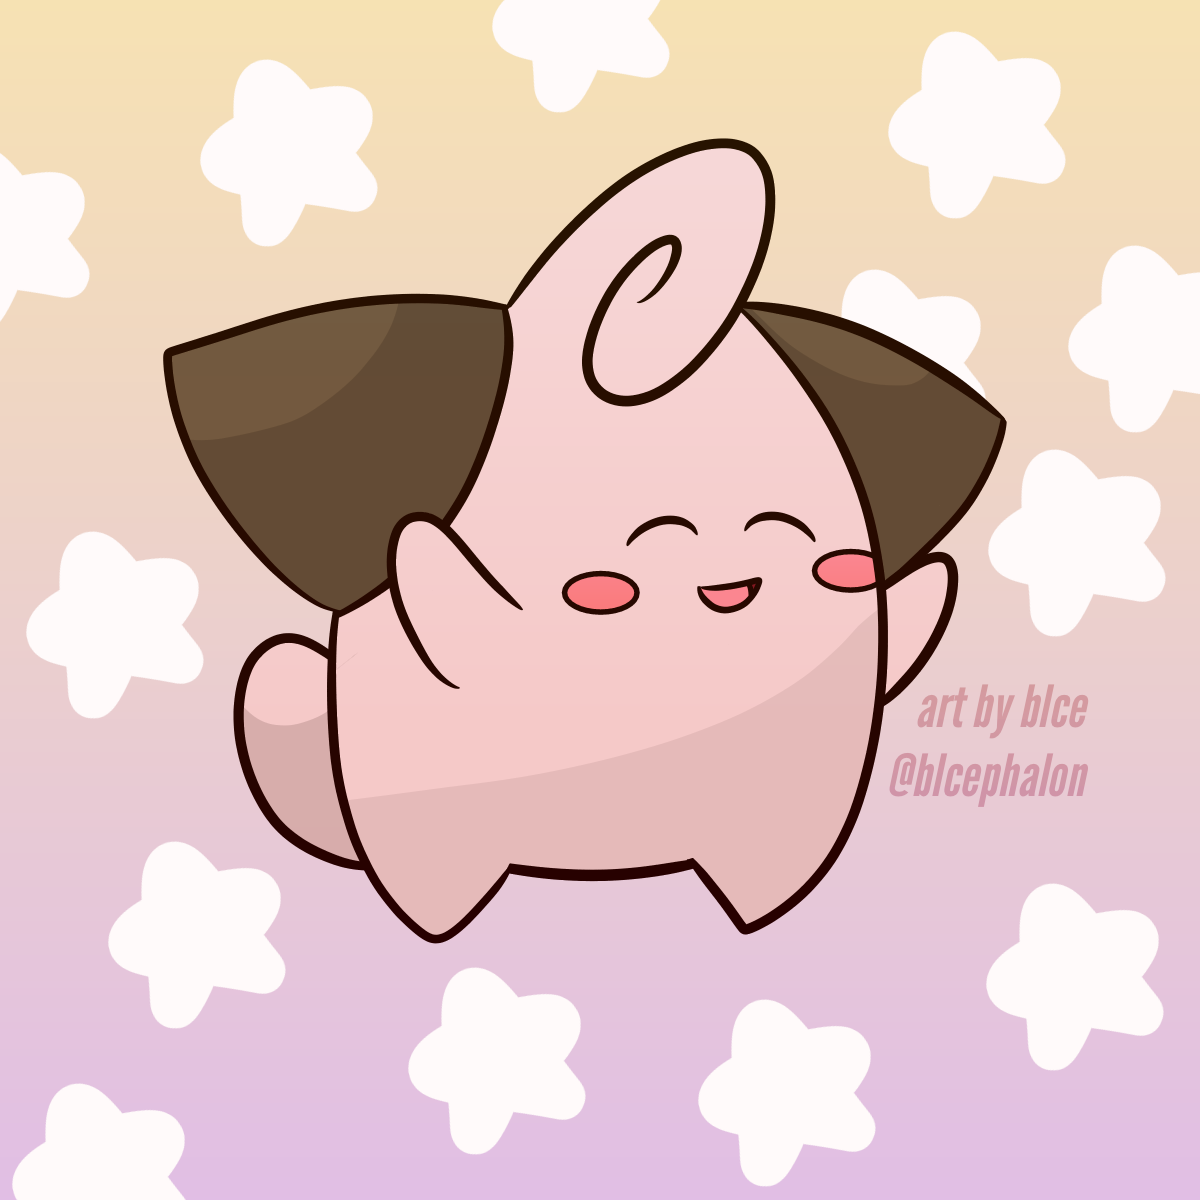 clefbday2.png